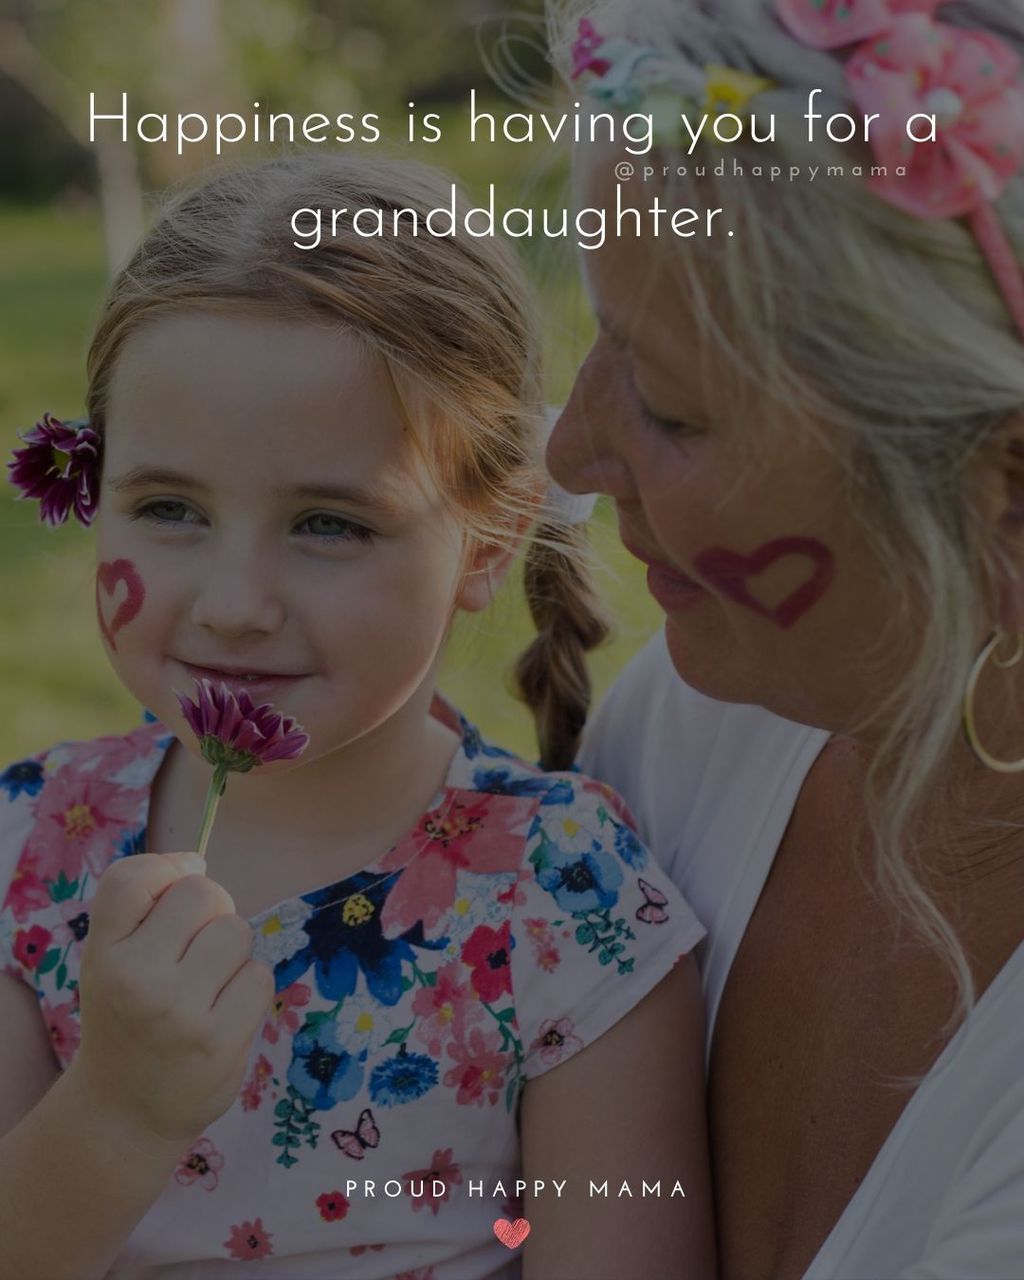 Granddaughter Quotes - Happiness is having you for a granddaughter.